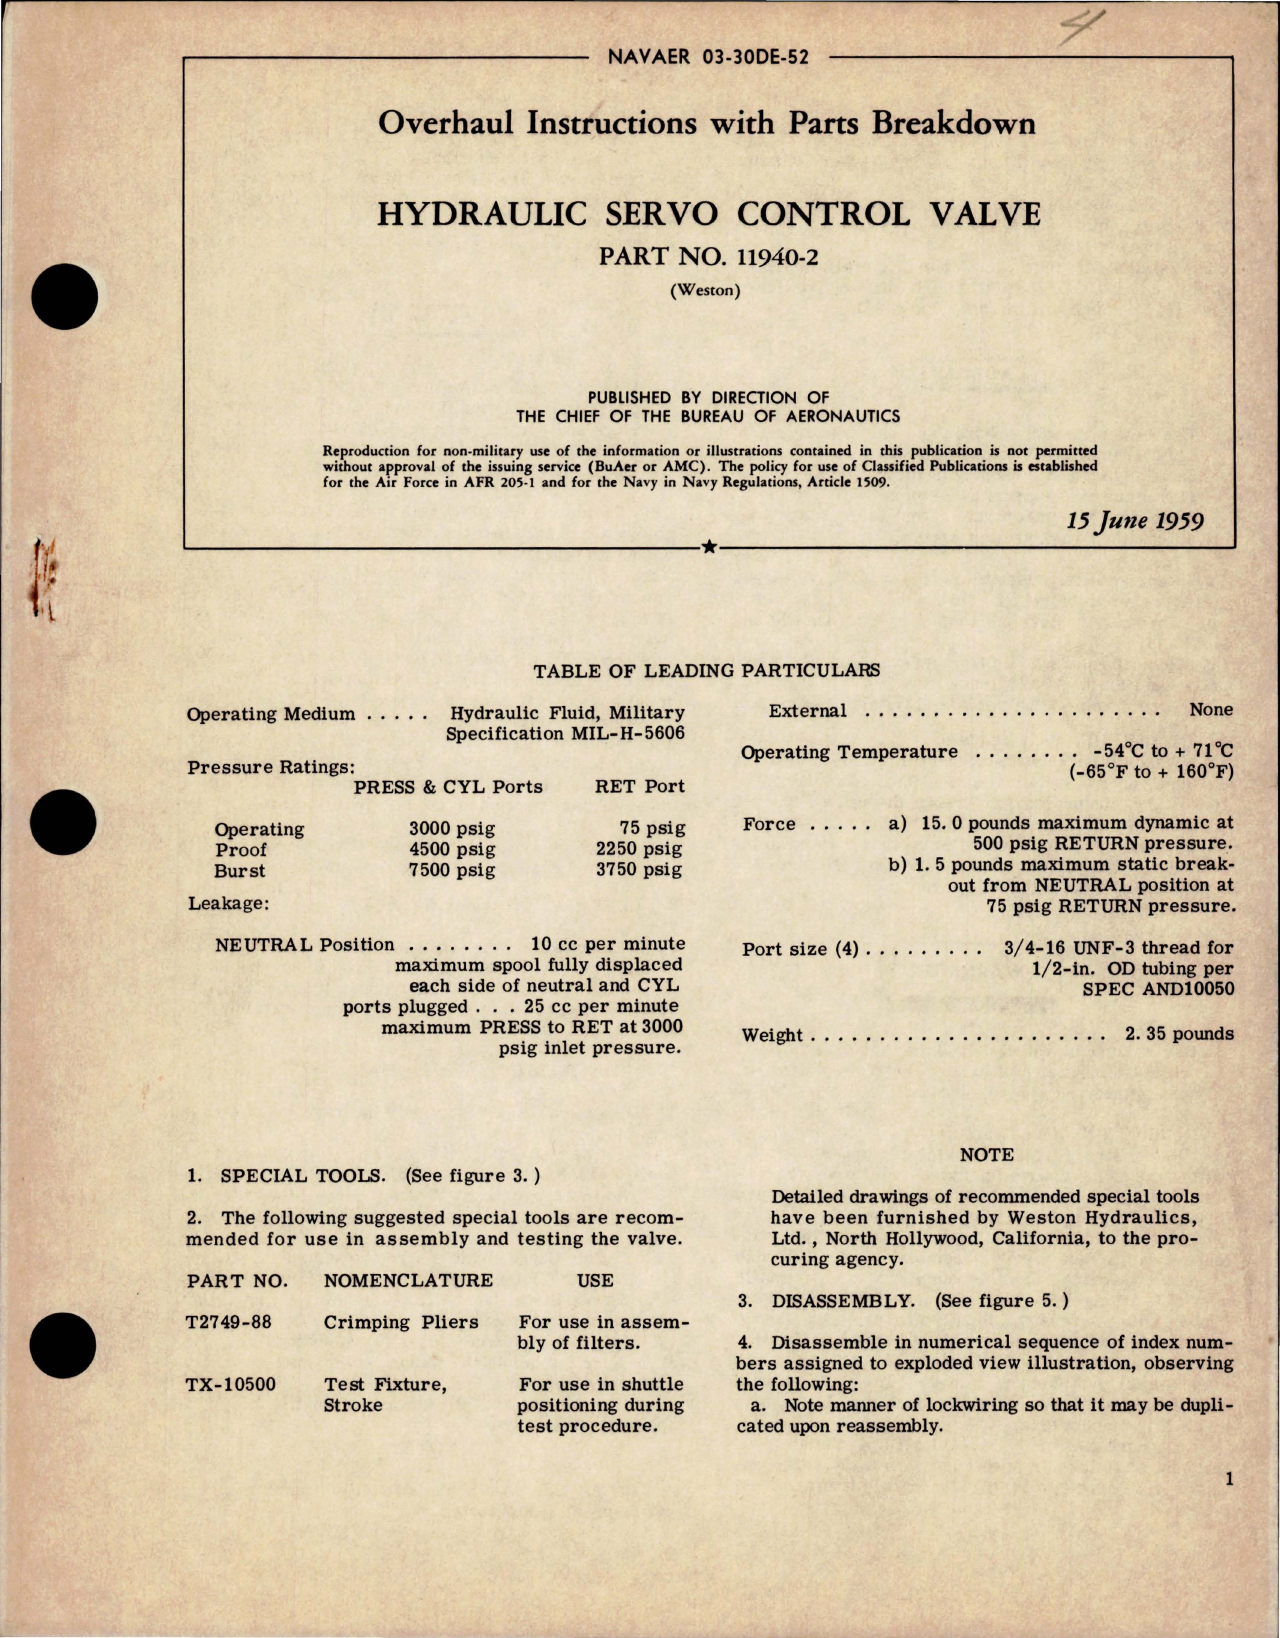 Sample page 1 from AirCorps Library document: Overhaul Instructions with Parts Breakdown for Hydraulic Servo Control Valve - Part 11940-2